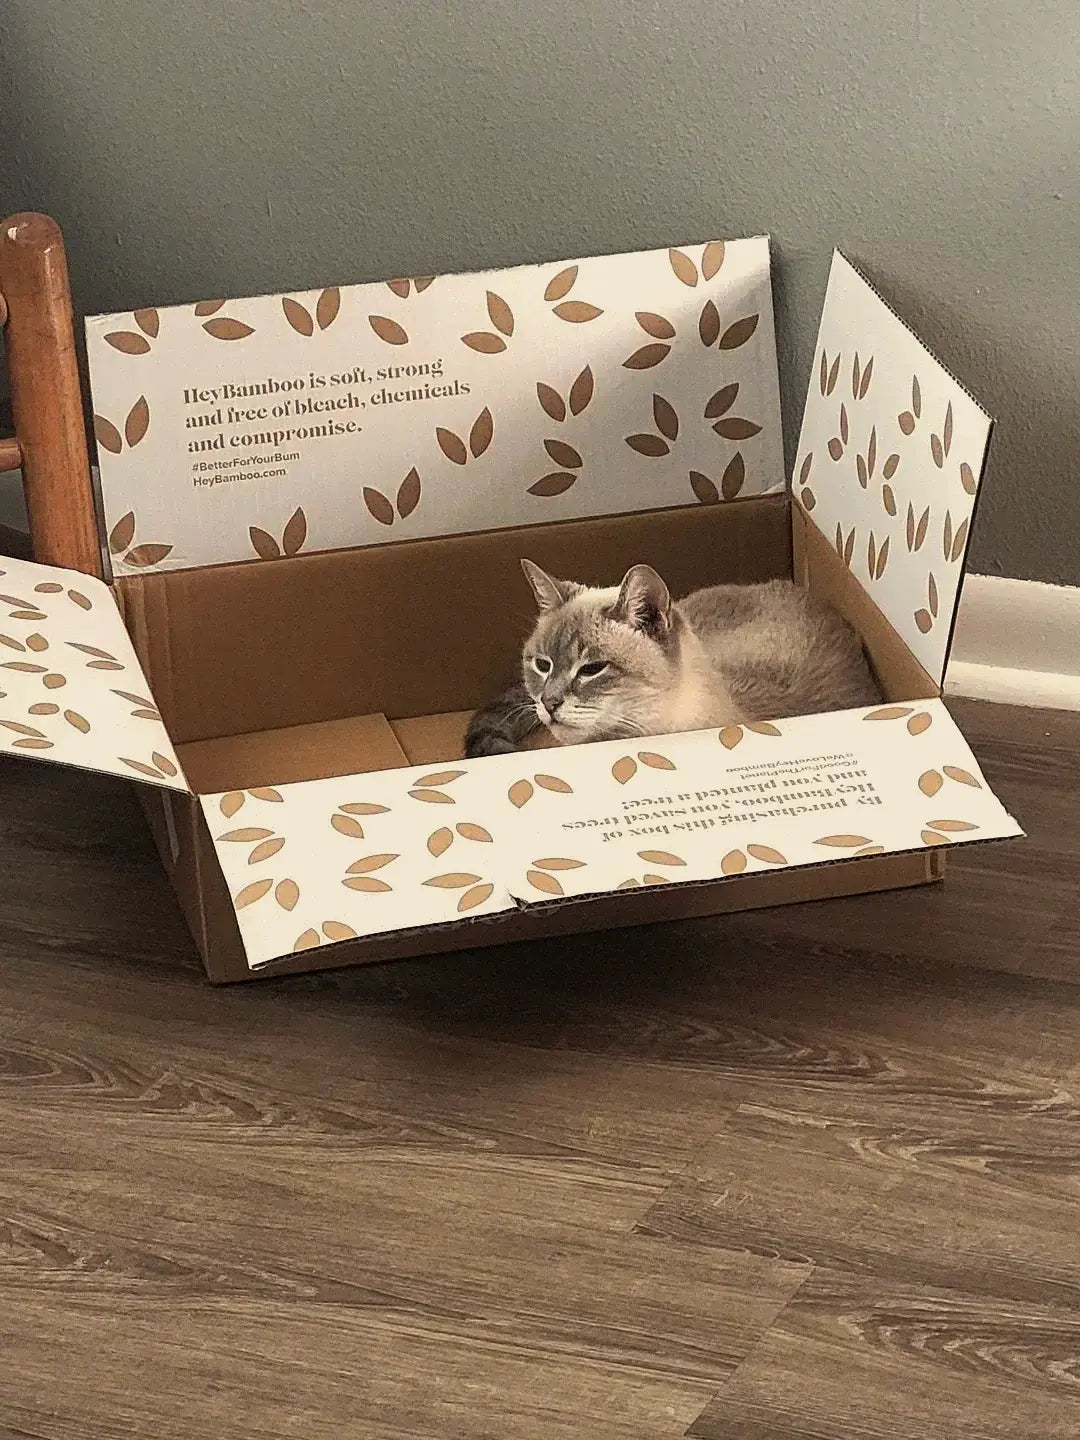 A cat in a settles down in a Hey Bamboo box